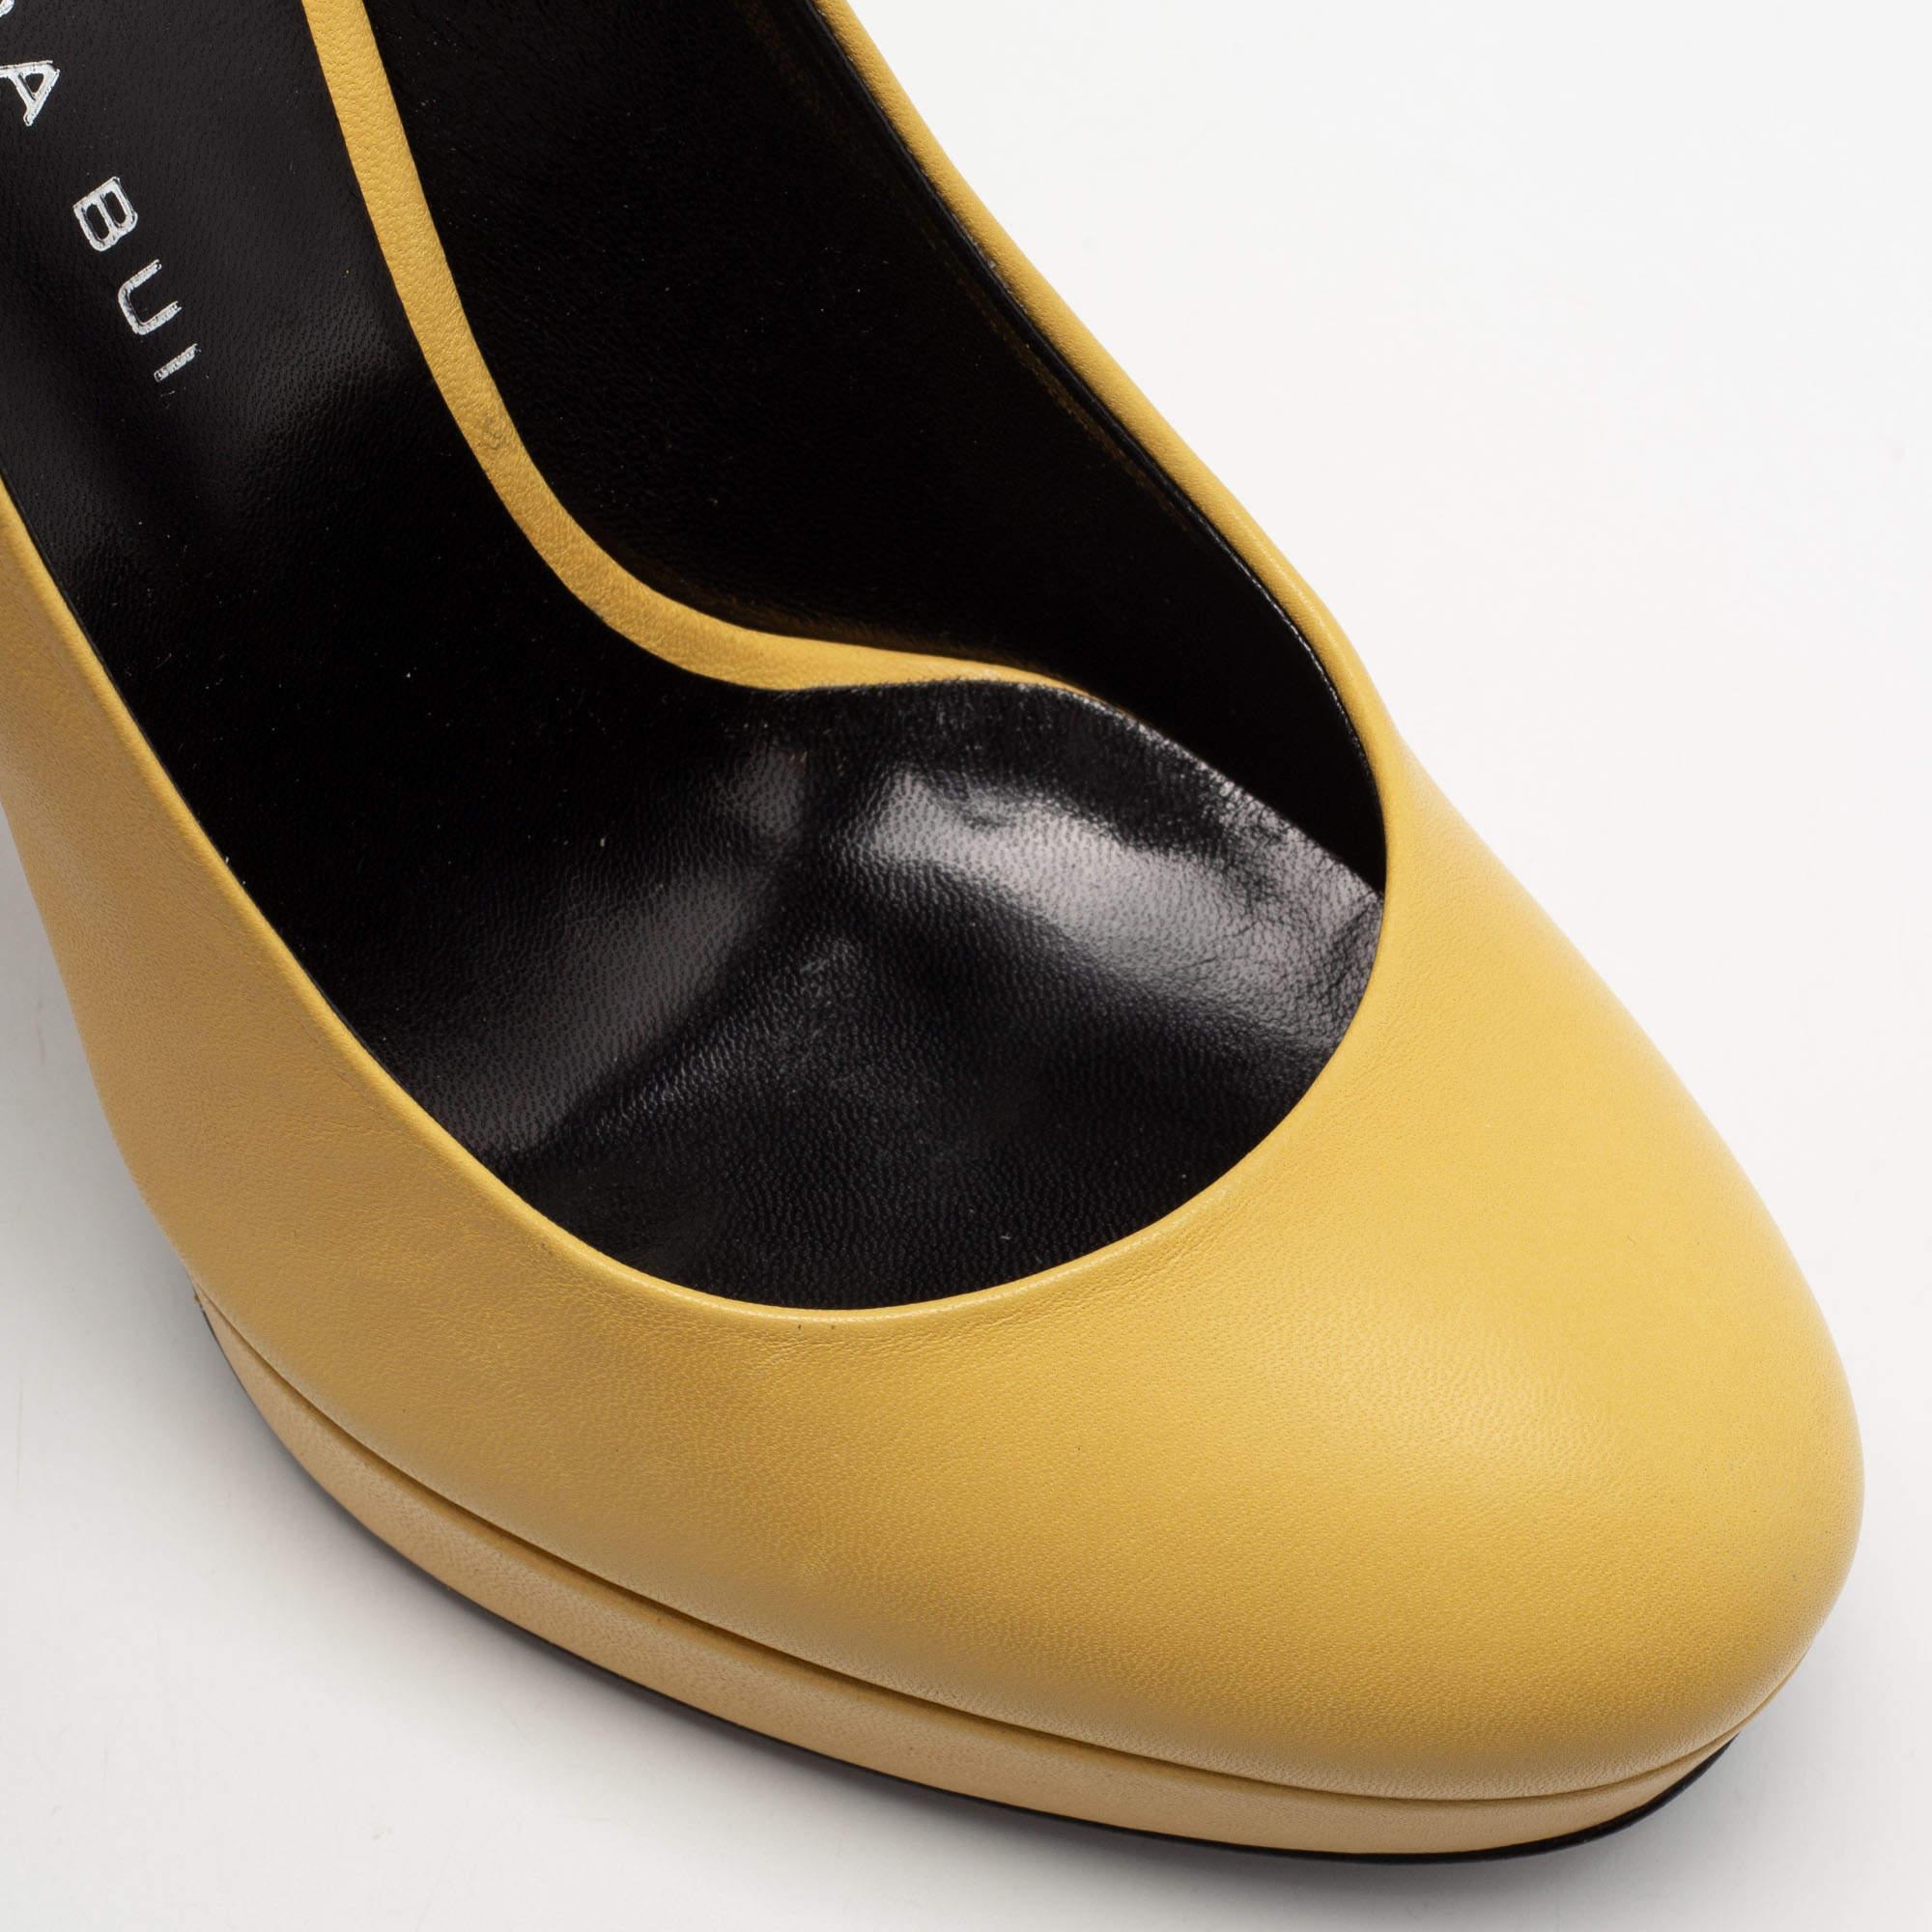 Barbara Bui Yellow Leather Platform Pumps Size 38 For Sale 2